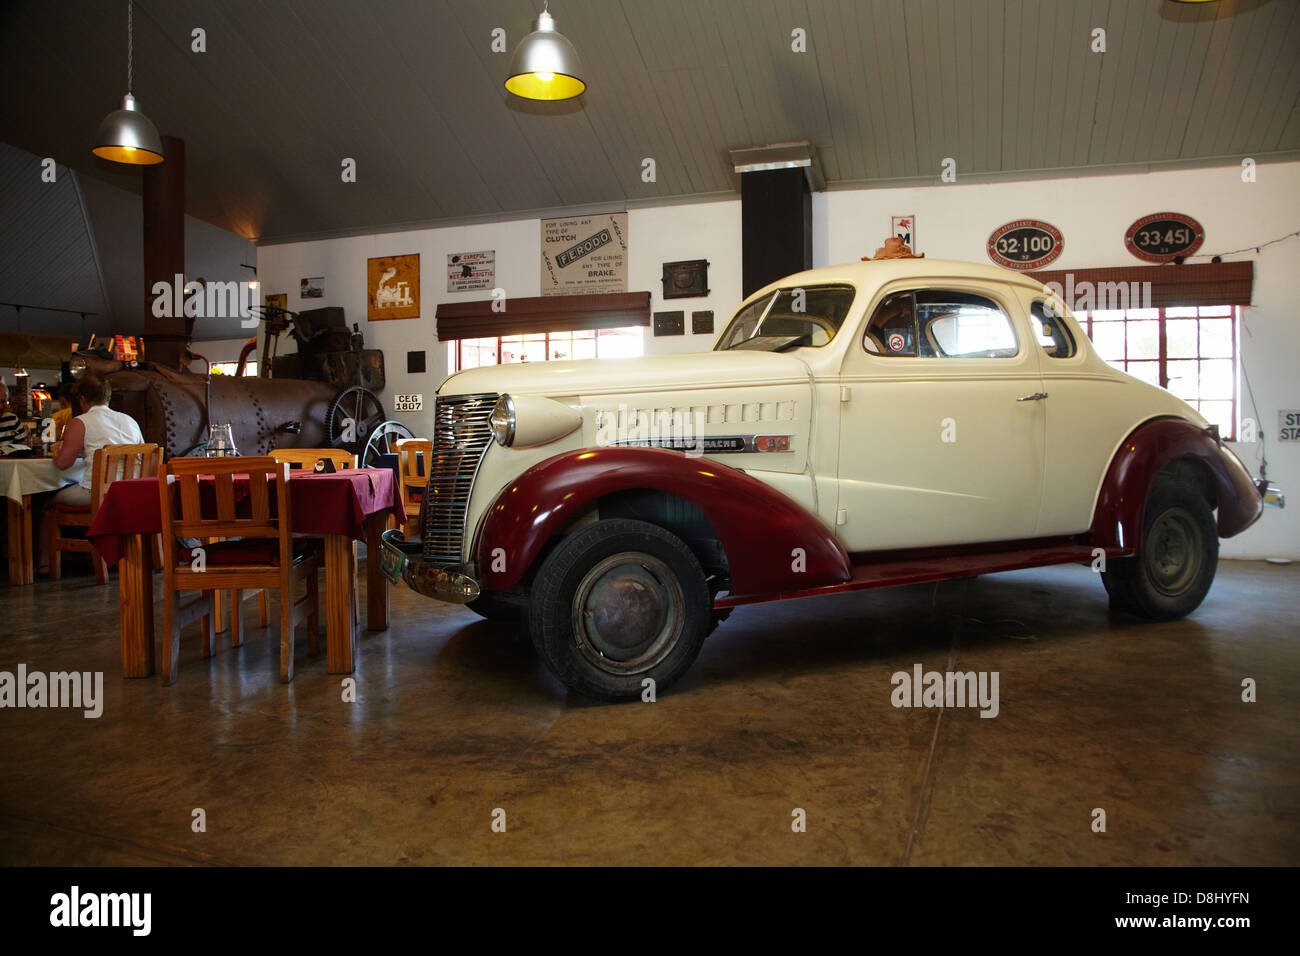 Old Chevrolet, Canon Roadhouse restaurant, near Fish River Canyon, Southern Namibia, Africa Stock Photo